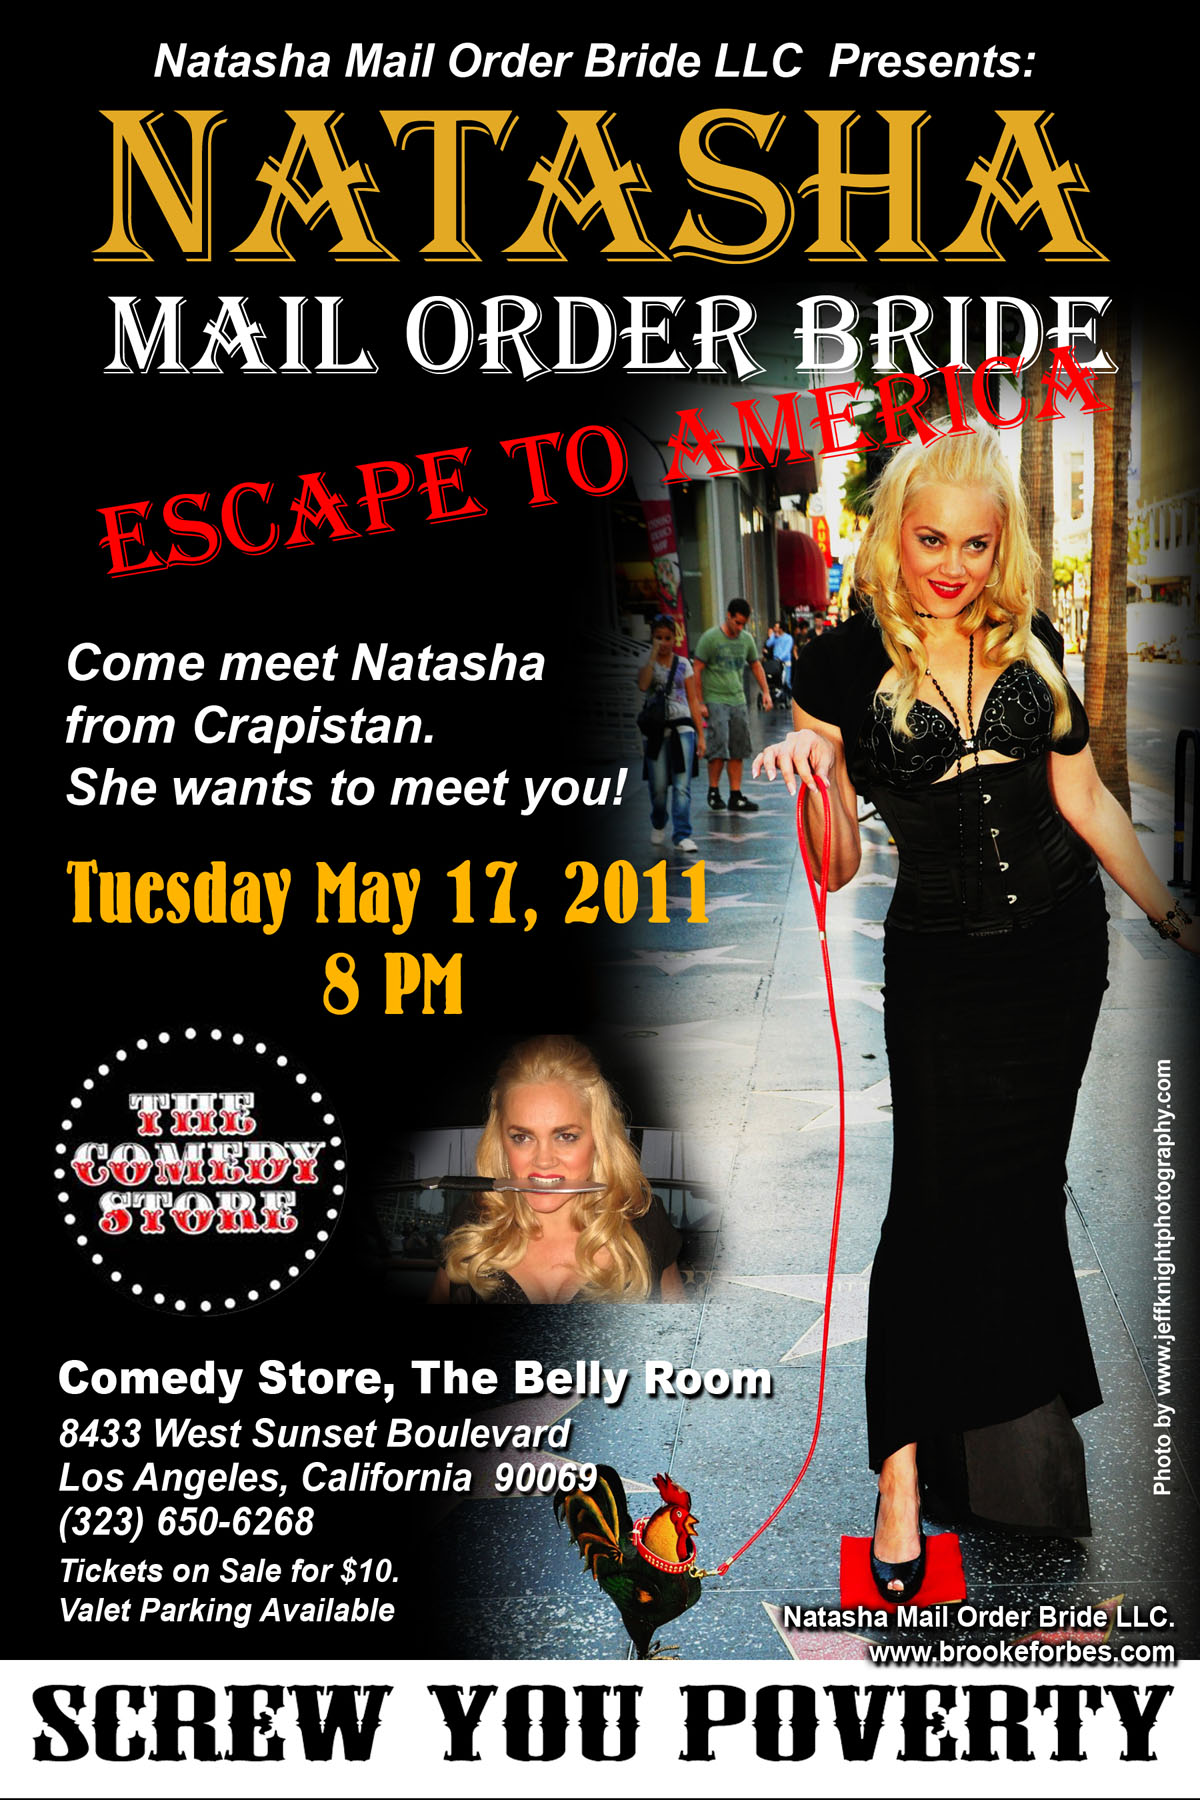 The World Famous Comedy Store, Stand-Up, Natasha the Mail Order Bride.